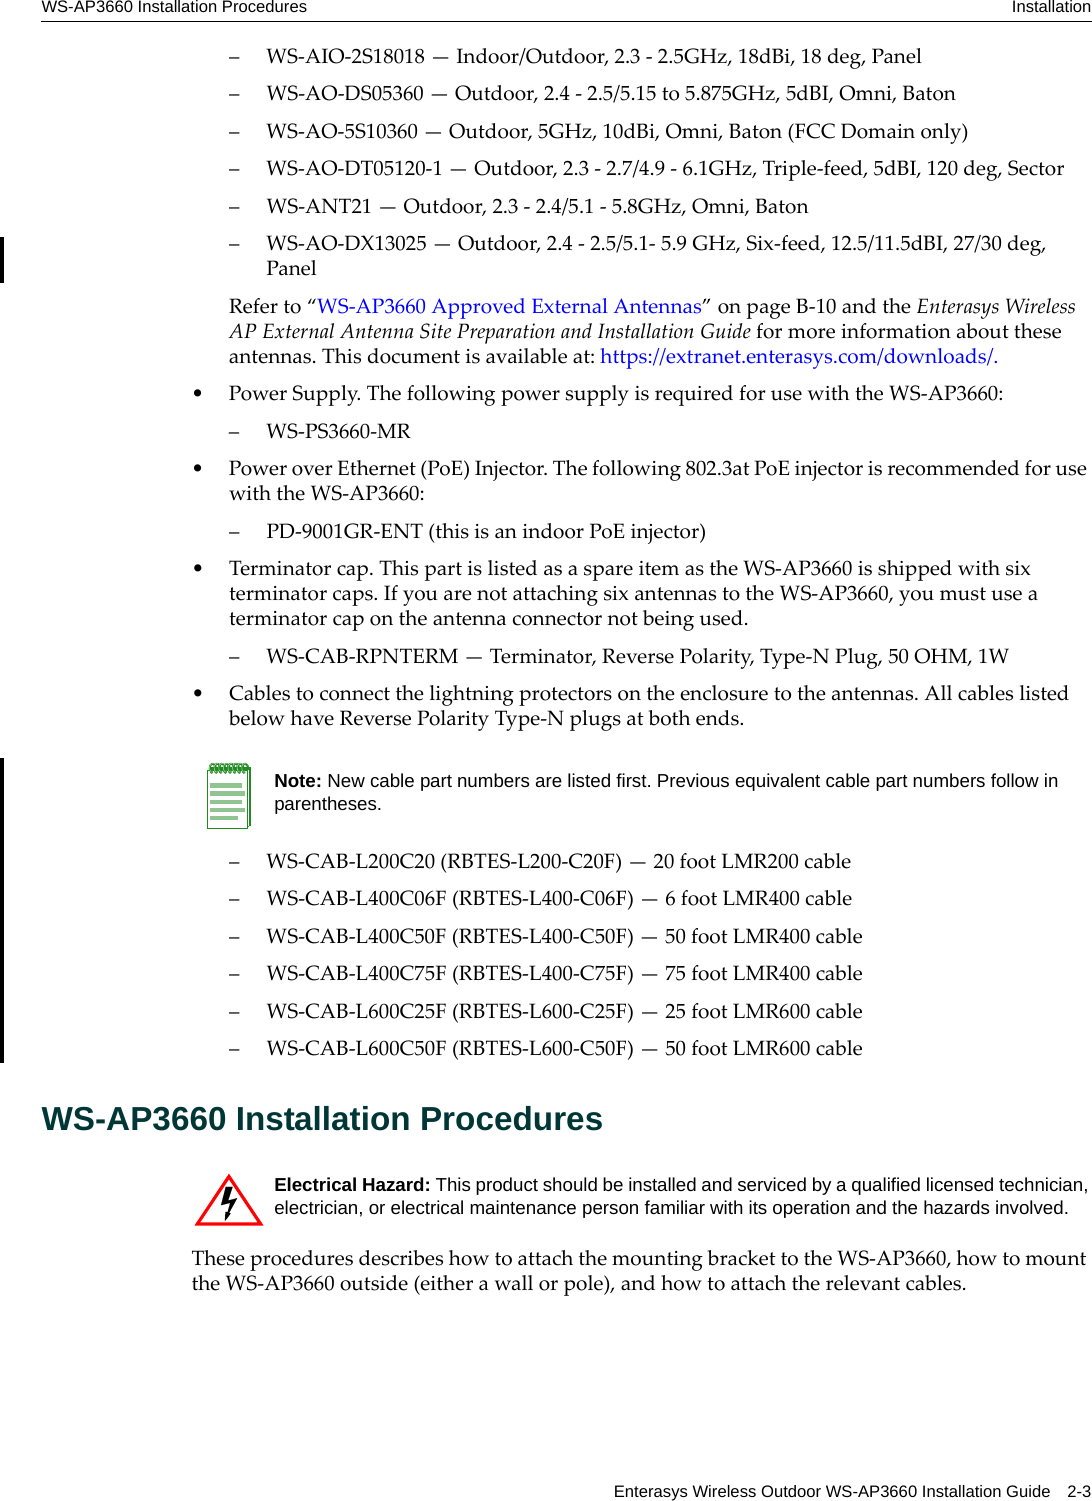 WS-AP3660 Installation Procedures InstallationEnterasys Wireless Outdoor WS-AP3660 Installation Guide 2-3– WS-AIO-2S18018 — Indoor/Outdoor, 2.3 - 2.5GHz, 18dBi, 18 deg, Panel– WS-AO-DS05360 — Outdoor, 2.4 - 2.5/5.15 to 5.875GHz, 5dBI, Omni, Baton– WS-AO-5S10360 — Outdoor, 5GHz, 10dBi, Omni, Baton (FCC Domain only)– WS-AO-DT05120-1 — Outdoor, 2.3 - 2.7/4.9 - 6.1GHz, Triple-feed, 5dBI, 120 deg, Sector– WS-ANT21 — Outdoor, 2.3 - 2.4/5.1 - 5.8GHz, Omni, Baton– WS-AO-DX13025 — Outdoor, 2.4 - 2.5/5.1- 5.9 GHz, Six-feed, 12.5/11.5dBI, 27/30 deg, PanelRefer to “WS-AP3660 Approved External Antennas” on page B-10 and the Enterasys Wireless AP External Antenna Site Preparation and Installation Guide for more information about these antennas. This document is available at: https://extranet.enterasys.com/downloads/.• Power Supply. The following power supply is required for use with the WS-AP3660:– WS-PS3660-MR• Power over Ethernet (PoE) Injector. The following 802.3at PoE injector is recommended for use with the WS-AP3660:– PD-9001GR-ENT (this is an indoor PoE injector)• Terminator cap. This part is listed as a spare item as the WS-AP3660 is shipped with six terminator caps. If you are not attaching six antennas to the WS-AP3660, you must use a terminator cap on the antenna connector not being used.– WS-CAB-RPNTERM — Terminator, Reverse Polarity, Type-N Plug, 50 OHM, 1W• Cables to connect the lightning protectors on the enclosure to the antennas. All cables listed below have Reverse Polarity Type-N plugs at both ends.– WS-CAB-L200C20 (RBTES-L200-C20F) — 20 foot LMR200 cable– WS-CAB-L400C06F (RBTES-L400-C06F) — 6 foot LMR400 cable– WS-CAB-L400C50F (RBTES-L400-C50F) — 50 foot LMR400 cable – WS-CAB-L400C75F (RBTES-L400-C75F) — 75 foot LMR400 cable– WS-CAB-L600C25F (RBTES-L600-C25F) — 25 foot LMR600 cable– WS-CAB-L600C50F (RBTES-L600-C50F) — 50 foot LMR600 cableWS-AP3660 Installation ProceduresThese procedures describes how to attach the mounting bracket to the WS-AP3660, how to mount the WS-AP3660 outside (either a wall or pole), and how to attach the relevant cables. Note: New cable part numbers are listed first. Previous equivalent cable part numbers follow in parentheses.Electrical Hazard: This product should be installed and serviced by a qualified licensed technician, electrician, or electrical maintenance person familiar with its operation and the hazards involved. 